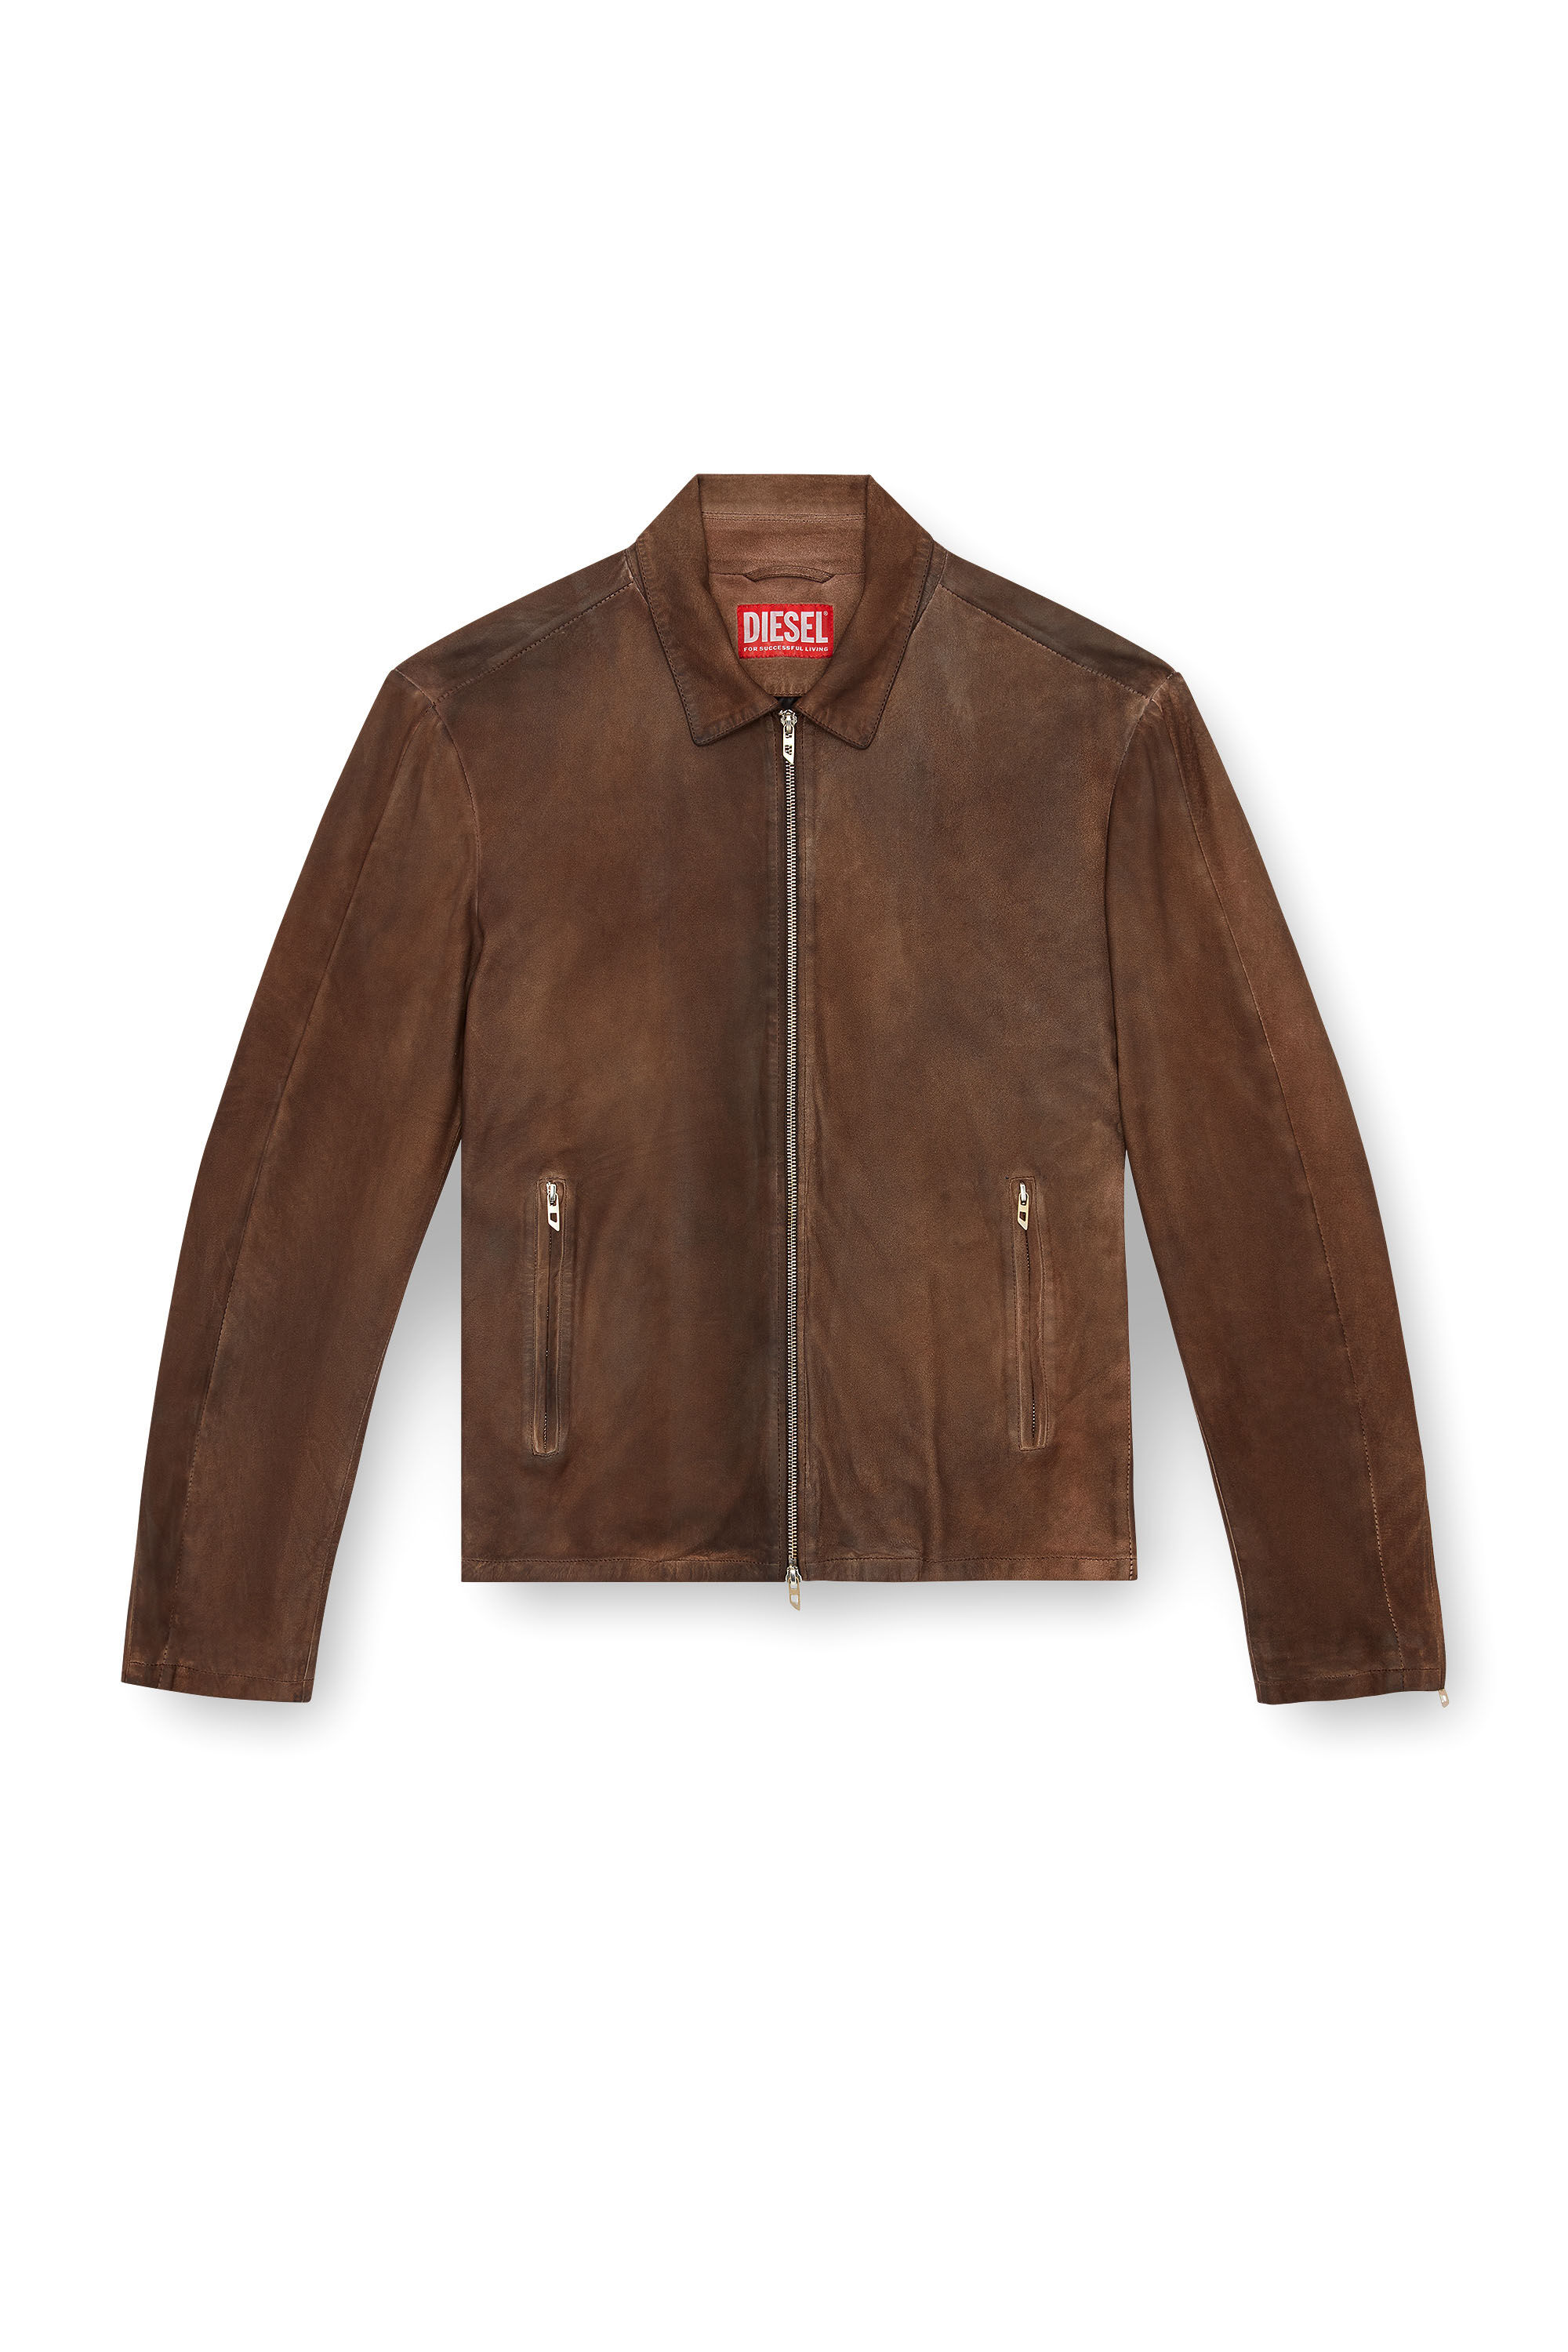 Diesel - L-CROMBE, Male Blouson jacket in treated leather in ブラウン - Image 2